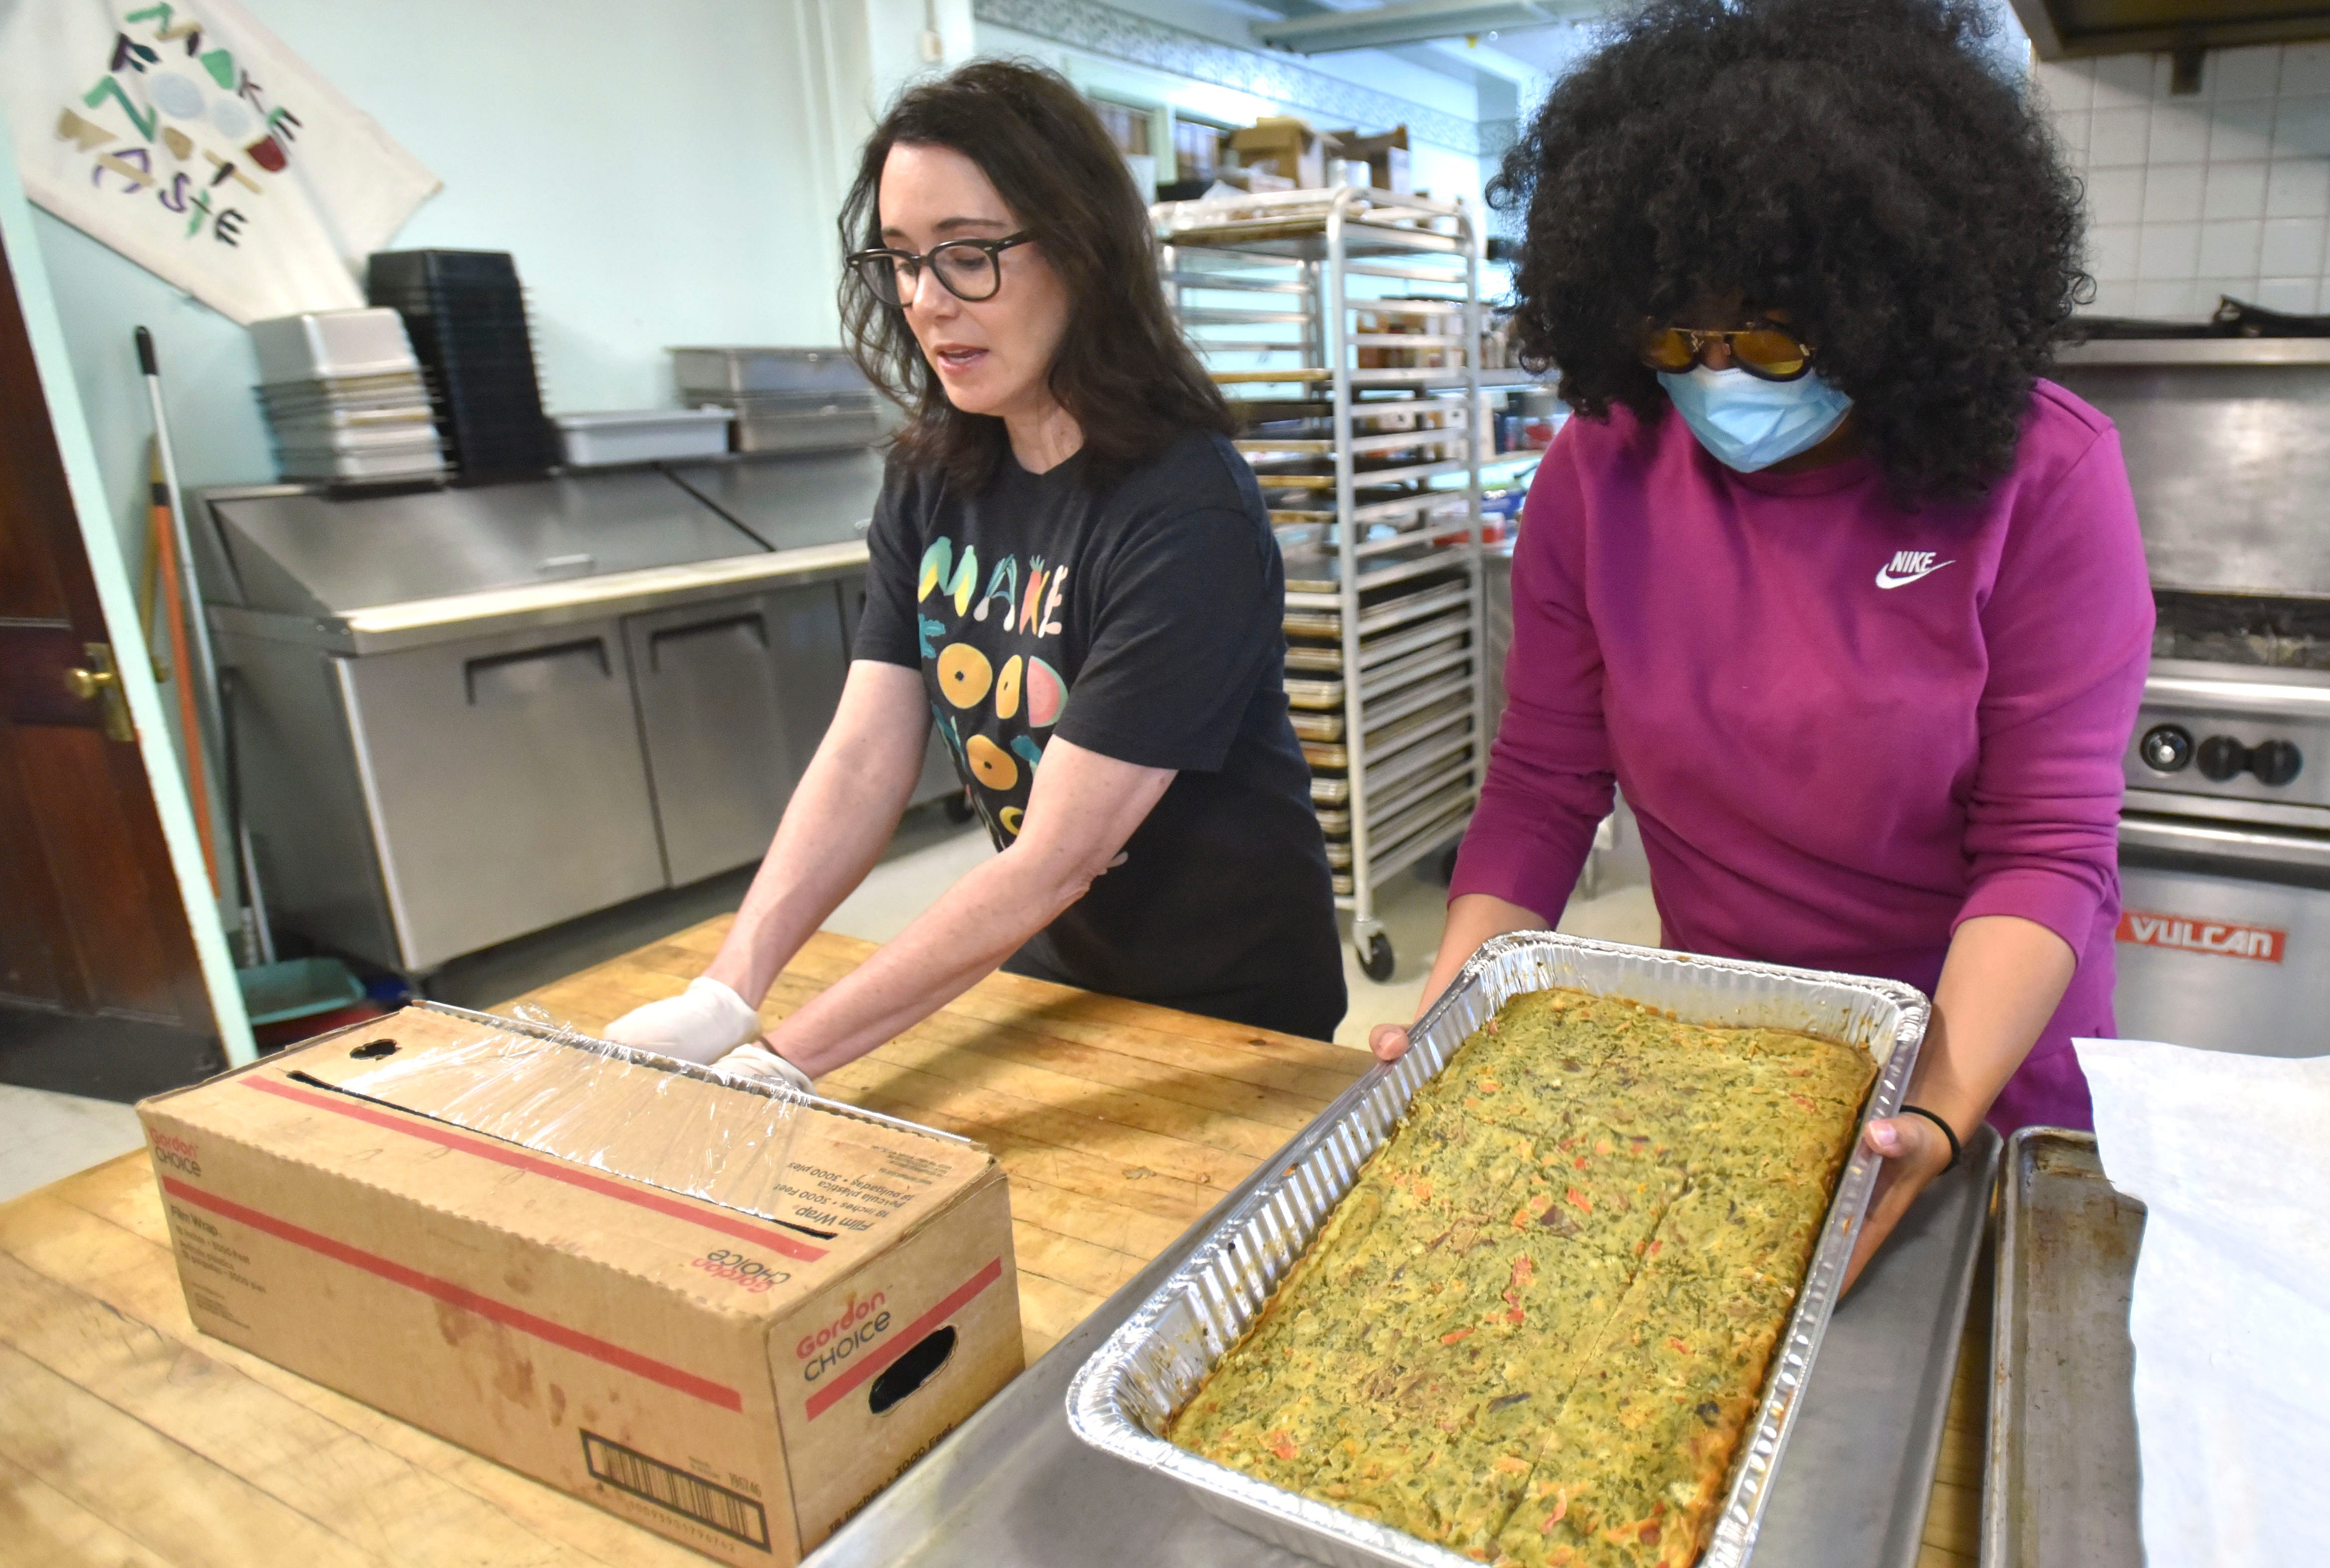 Make Food Not Waste Executive Director Danielle Todd, left, wraps frittatas as Brittany Peeler, community engagement director brings more food in the kitchen basement of the Jefferson Avenue Presbyterian Church before food distribution begins.